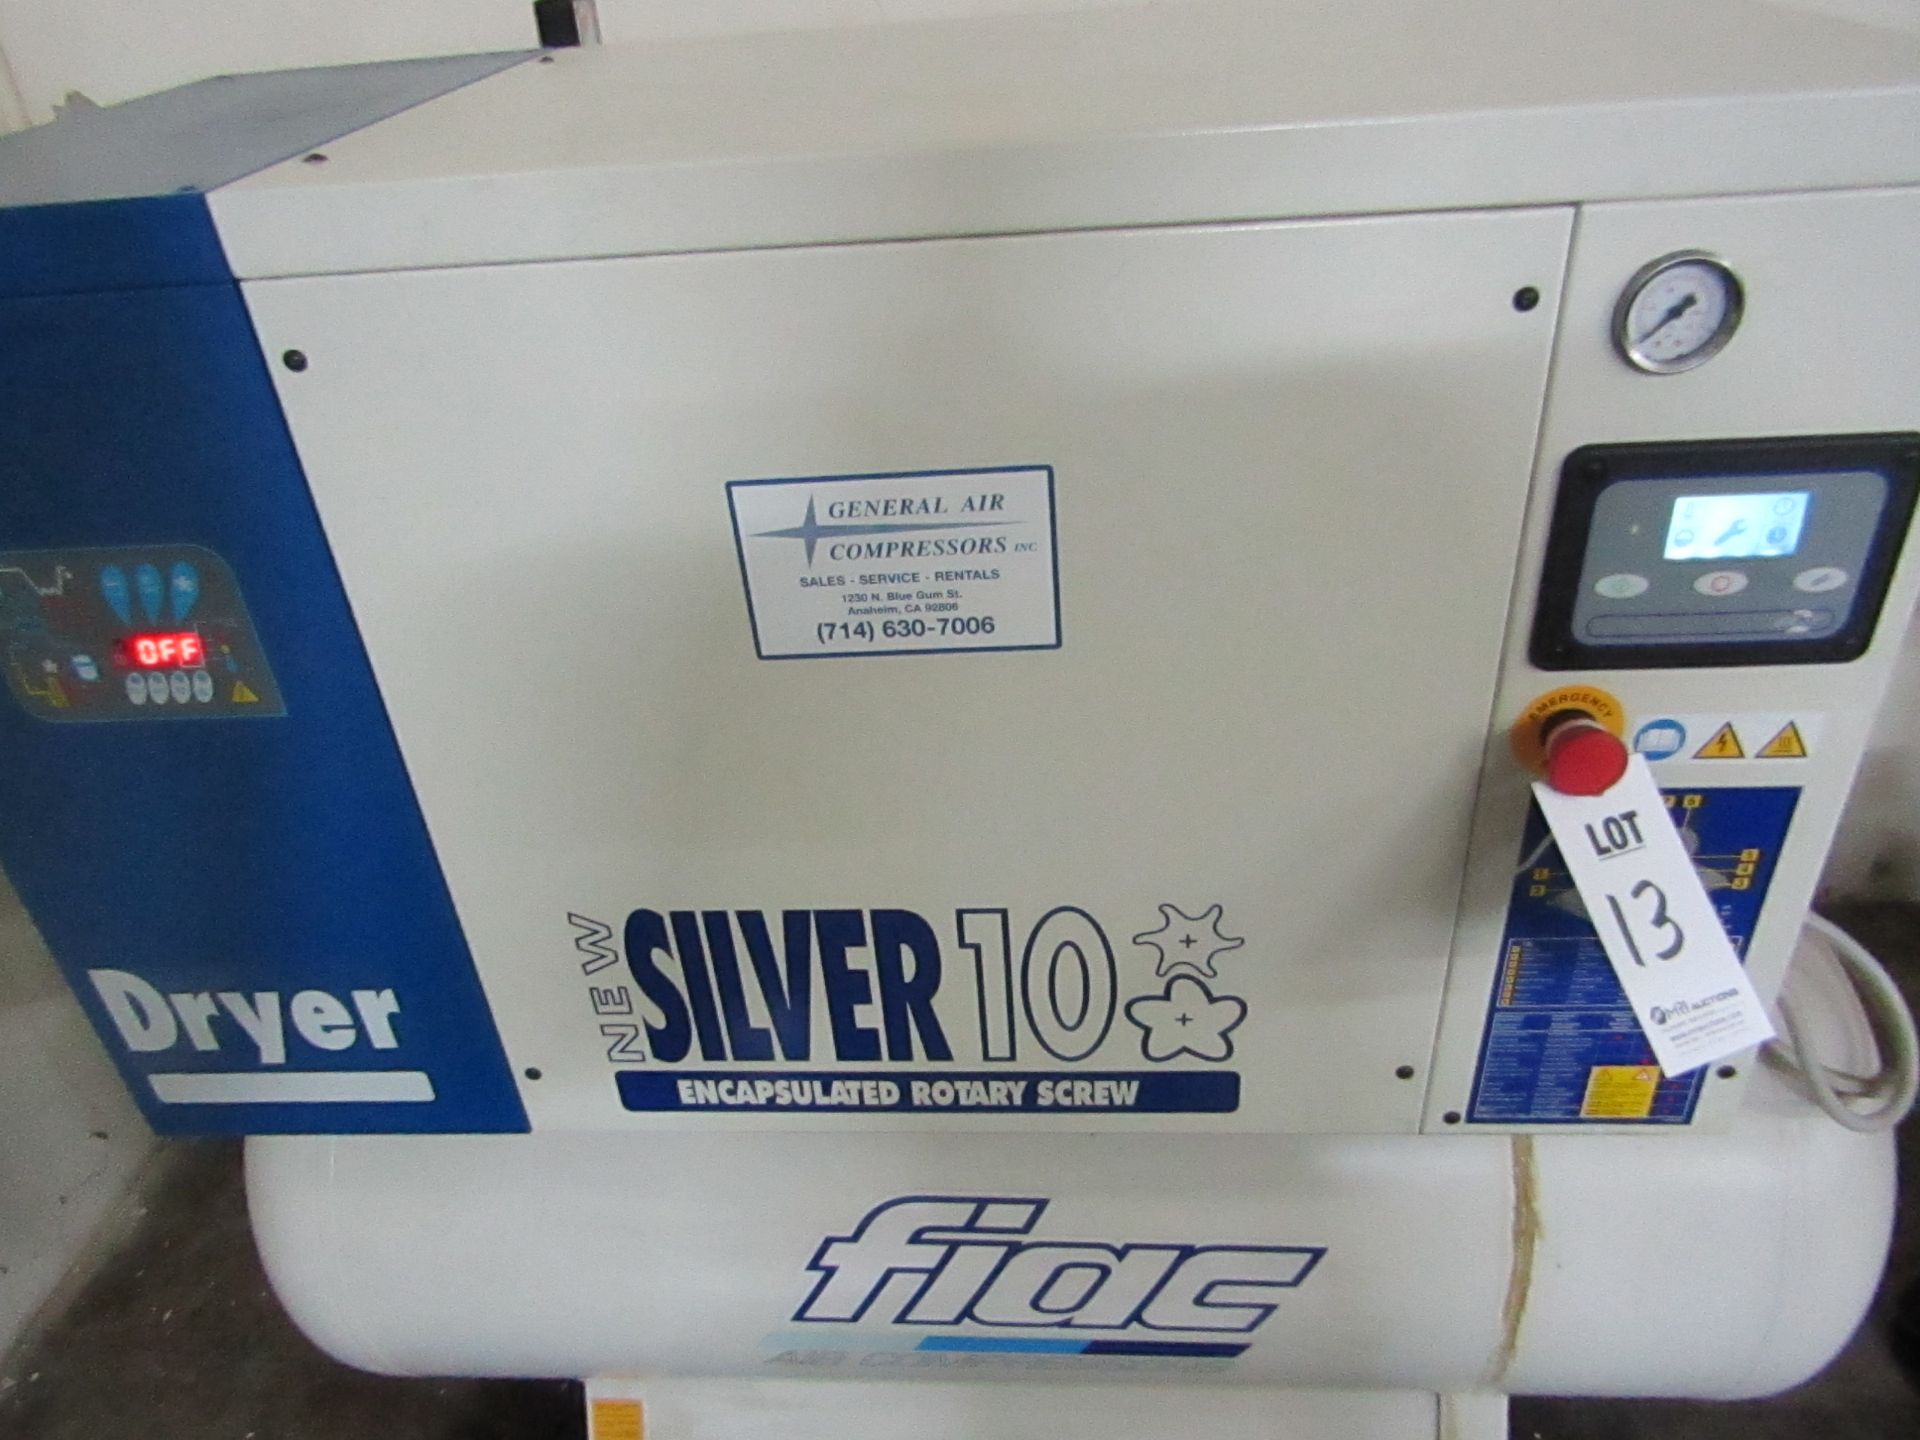 WERTHER AIR COMPRESSOR, MODEL NEW SILVER 10/300, SERIAL BQ 10 56630, MANUFACTURED 2015 - Image 2 of 4